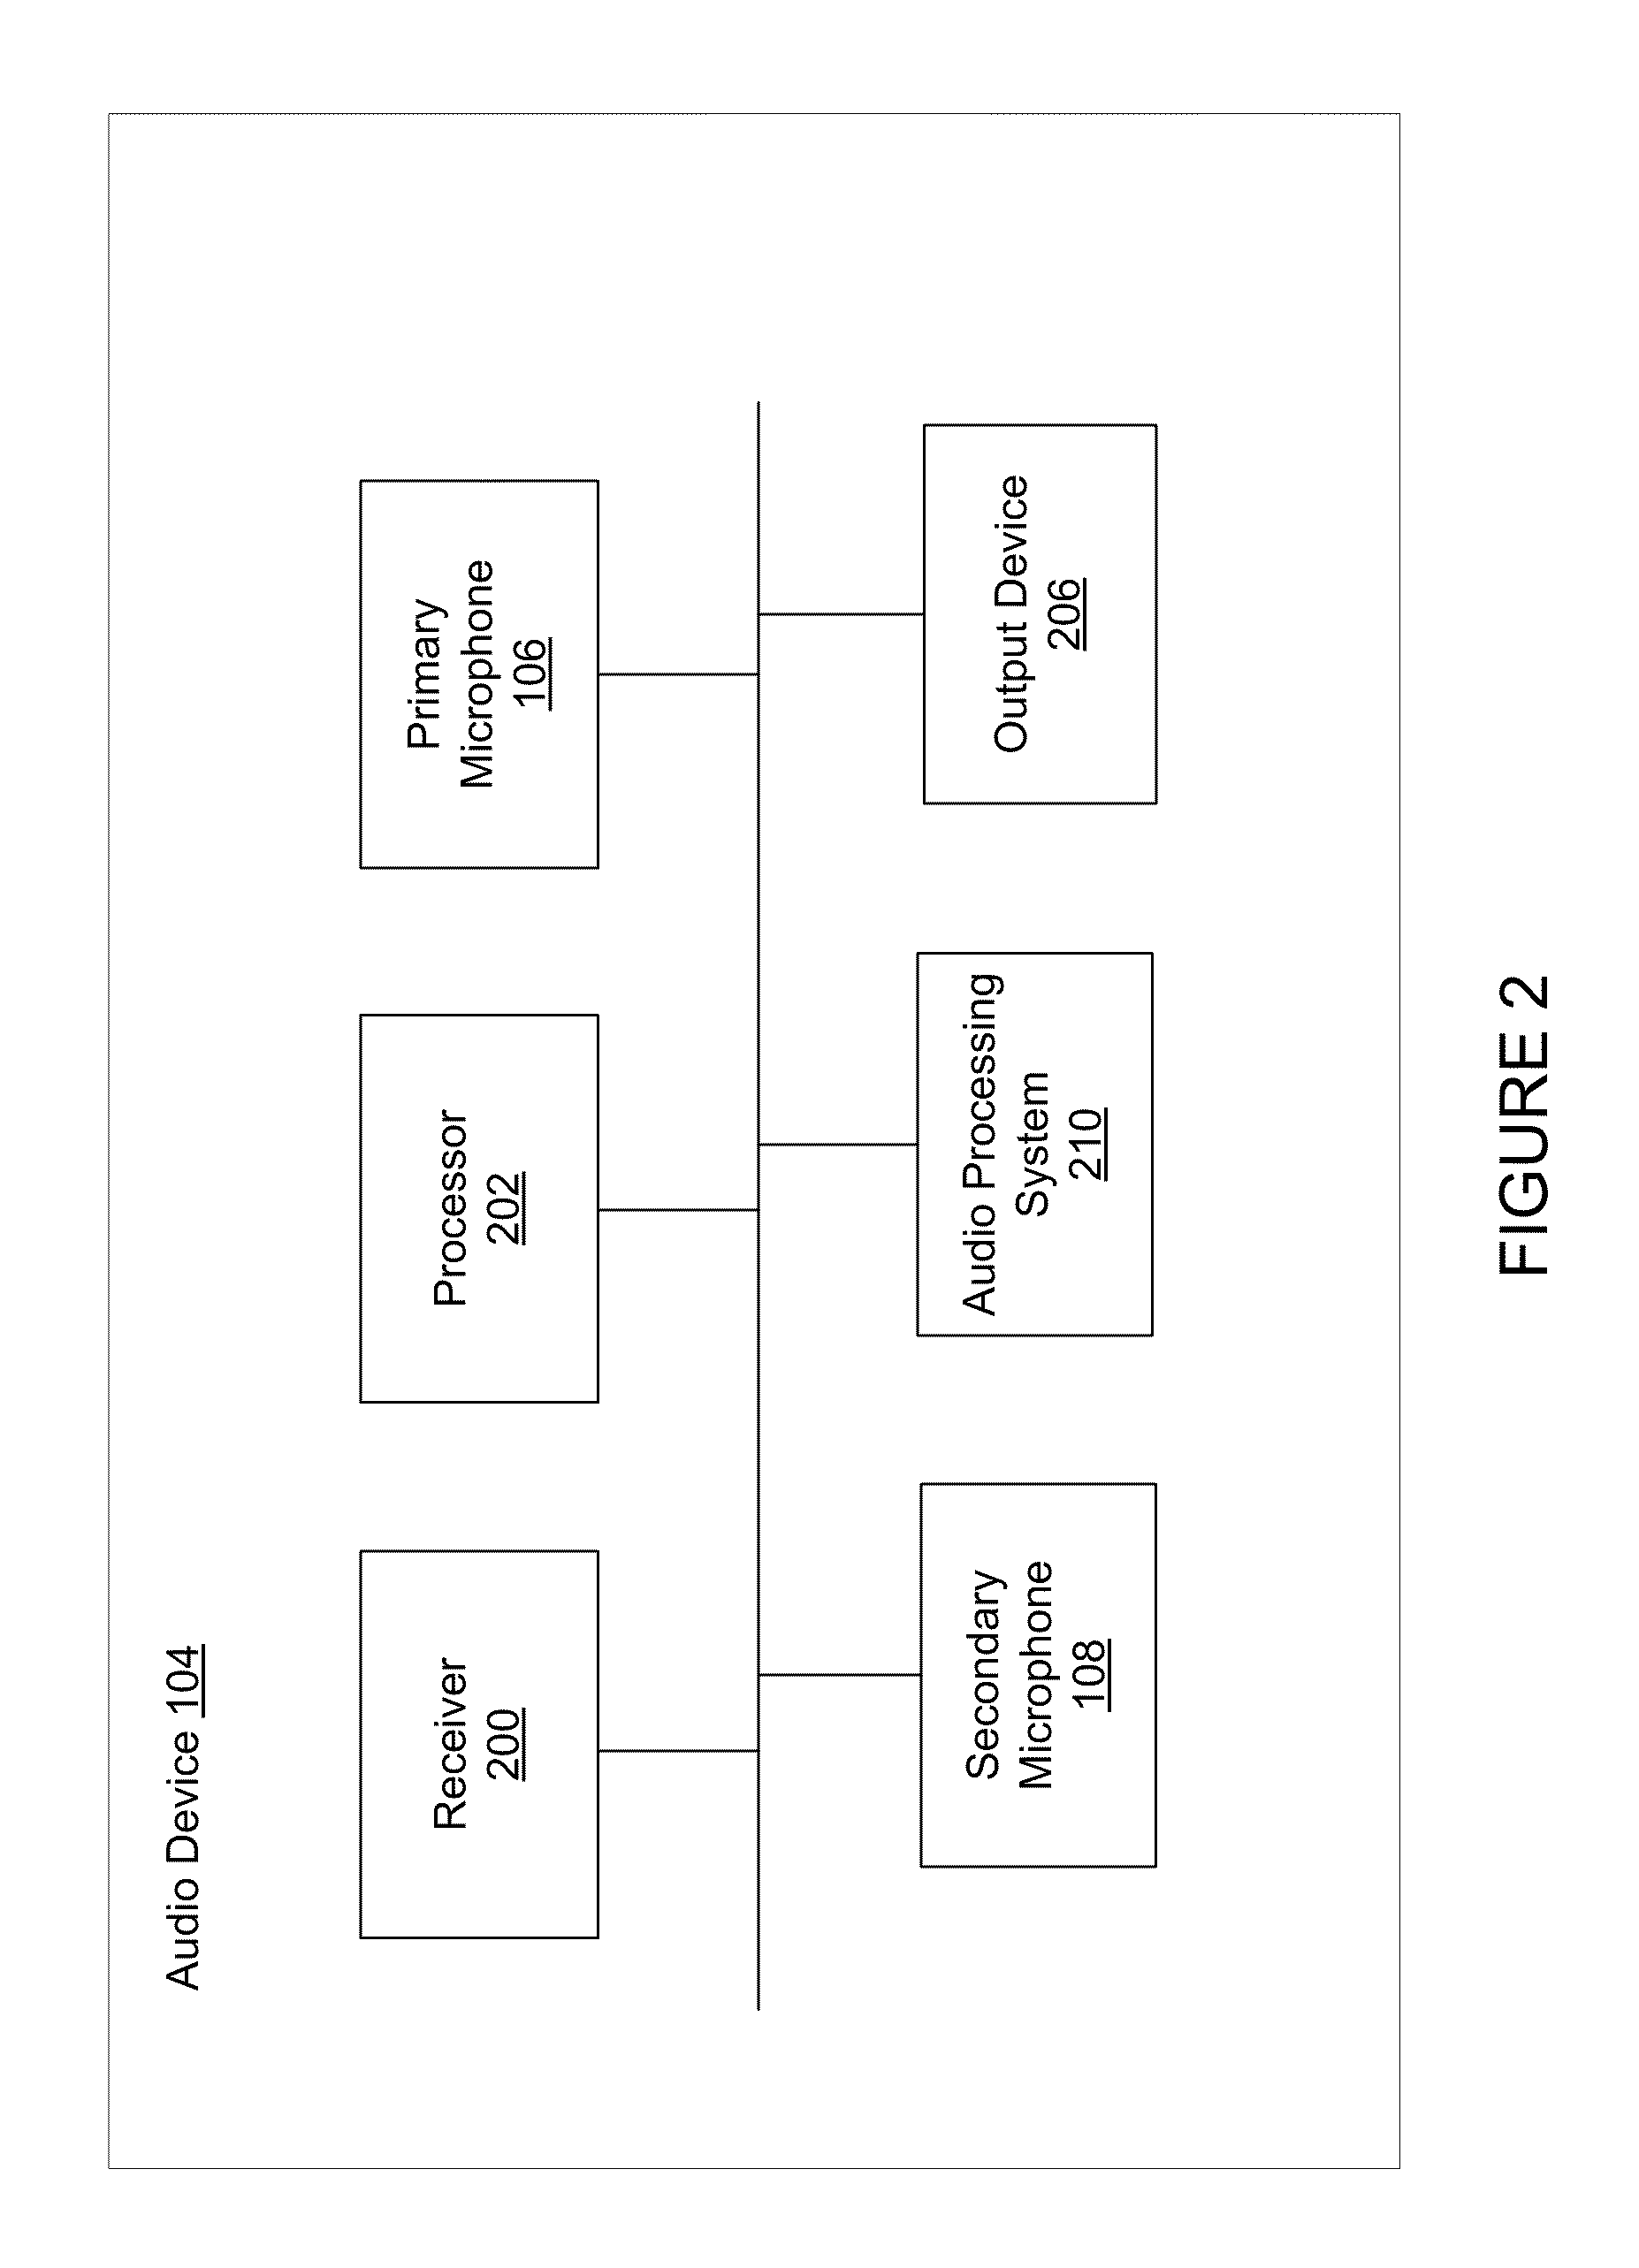 Method for Jointly Optimizing Noise Reduction and Voice Quality in a Mono or Multi-Microphone System